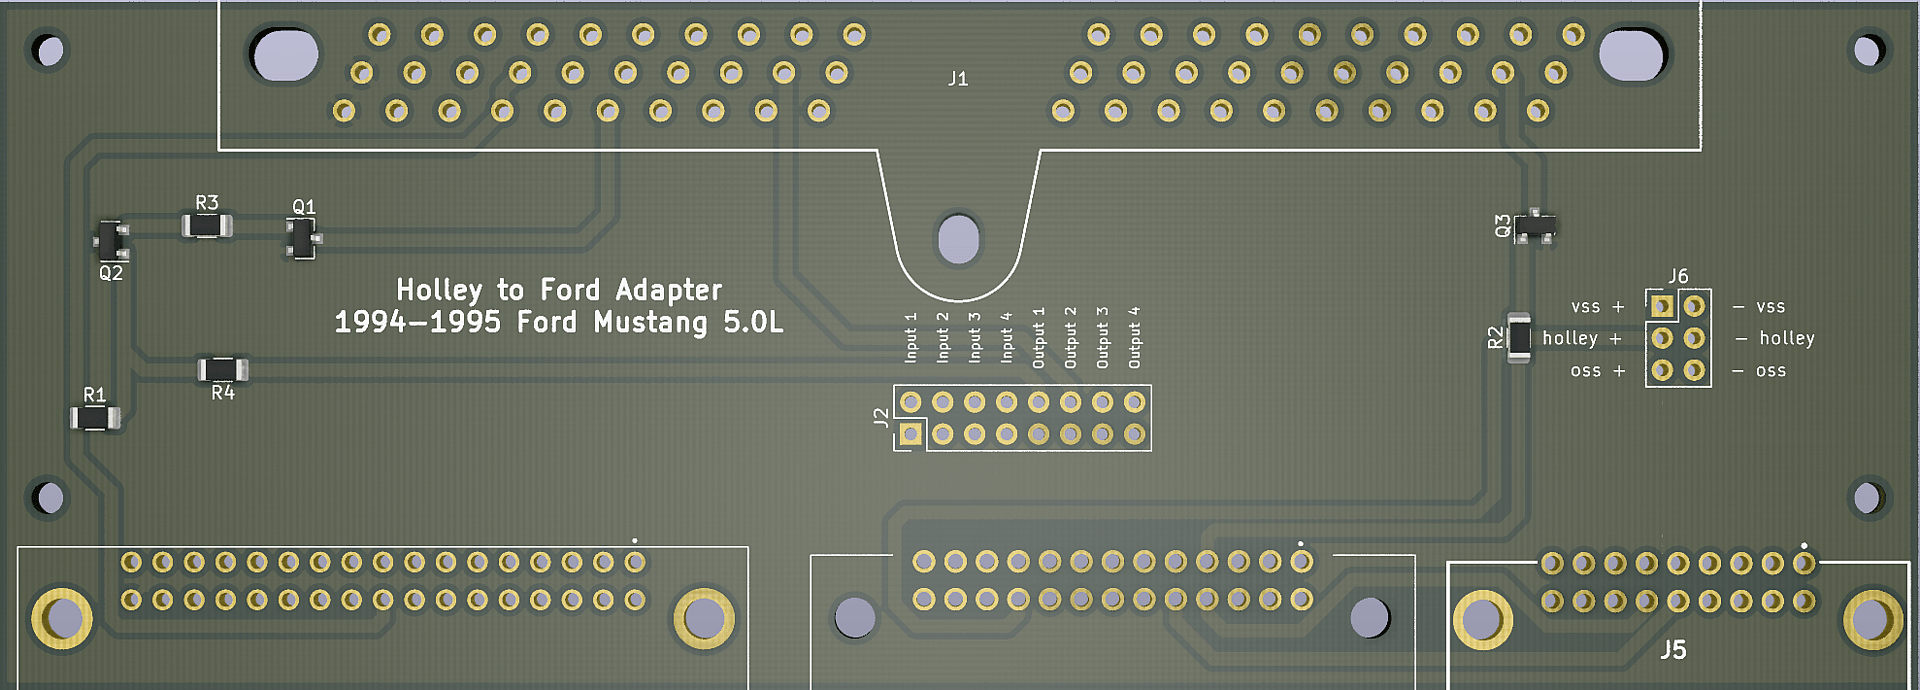 94_95_PCB_Adapter_Front.png